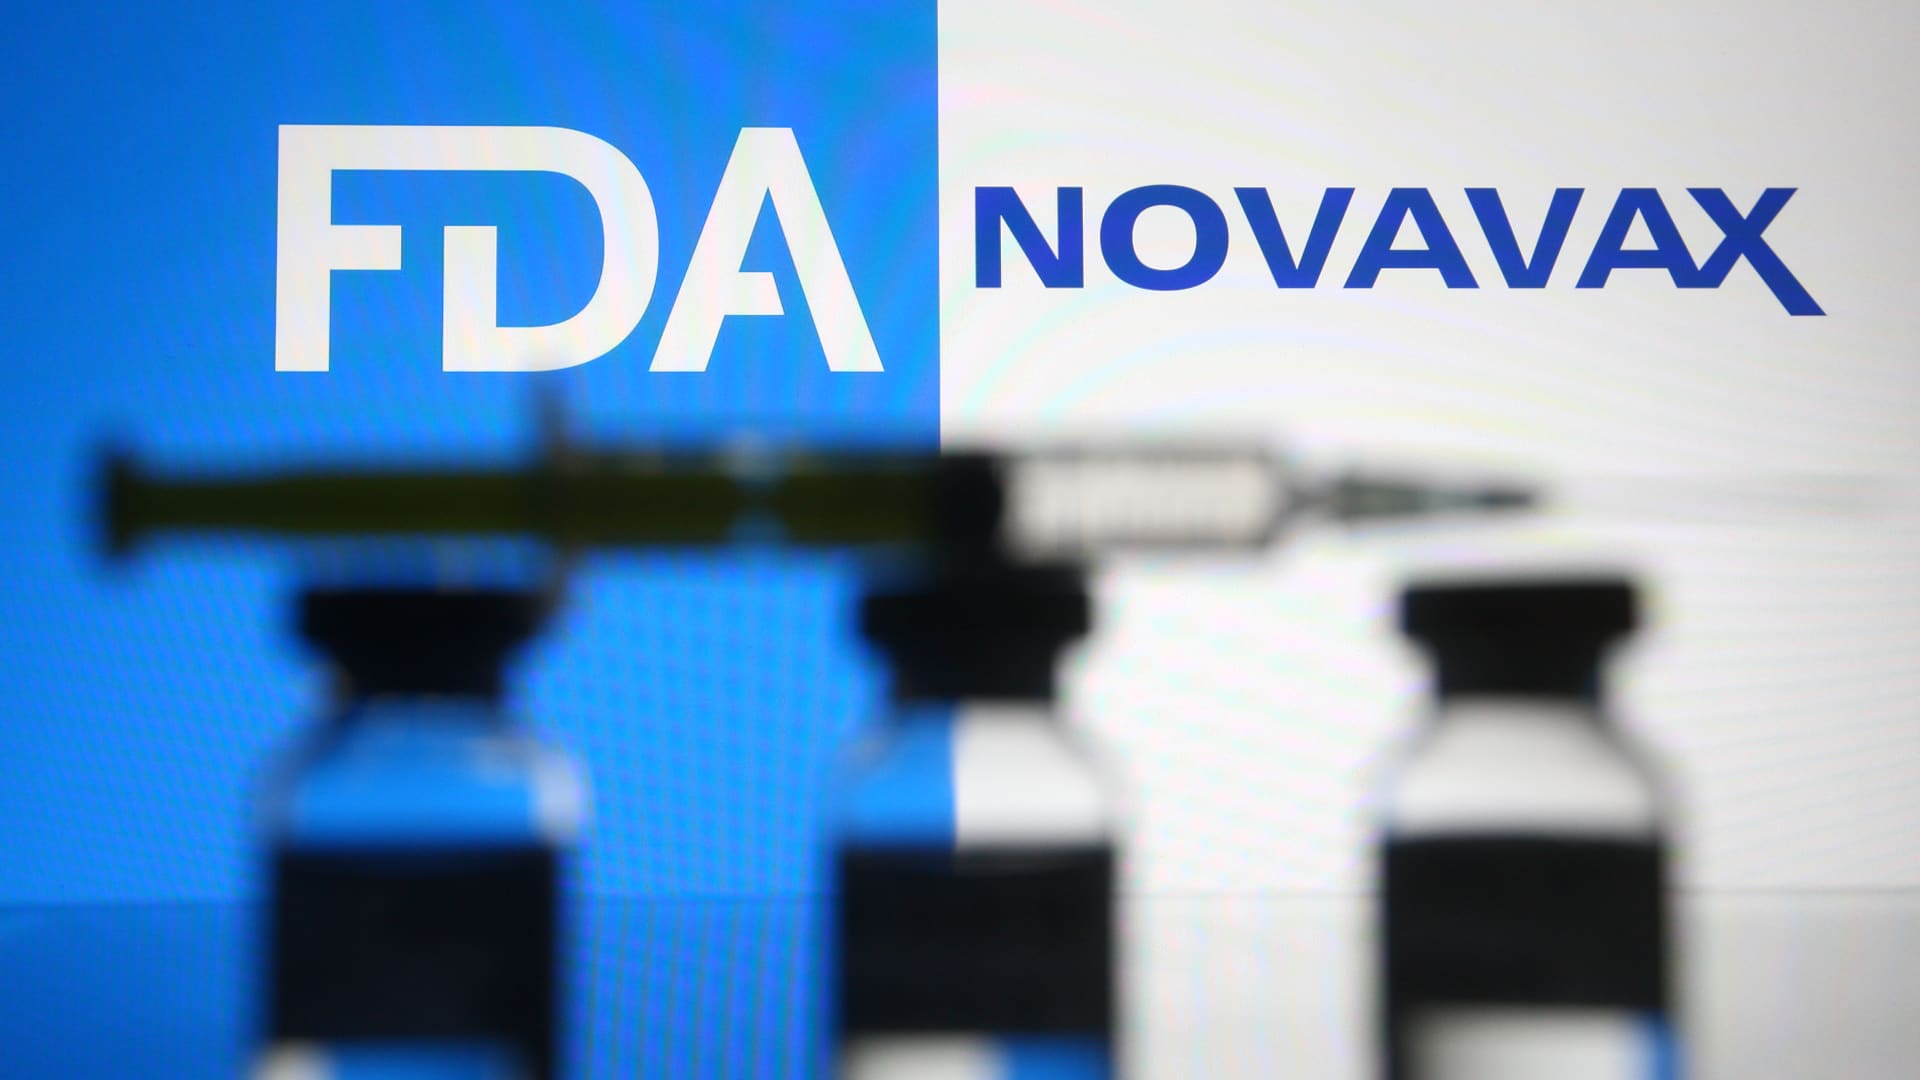 Novavax Covid vaccine clears key steps on the road to FDA approval after the committee approves the shot